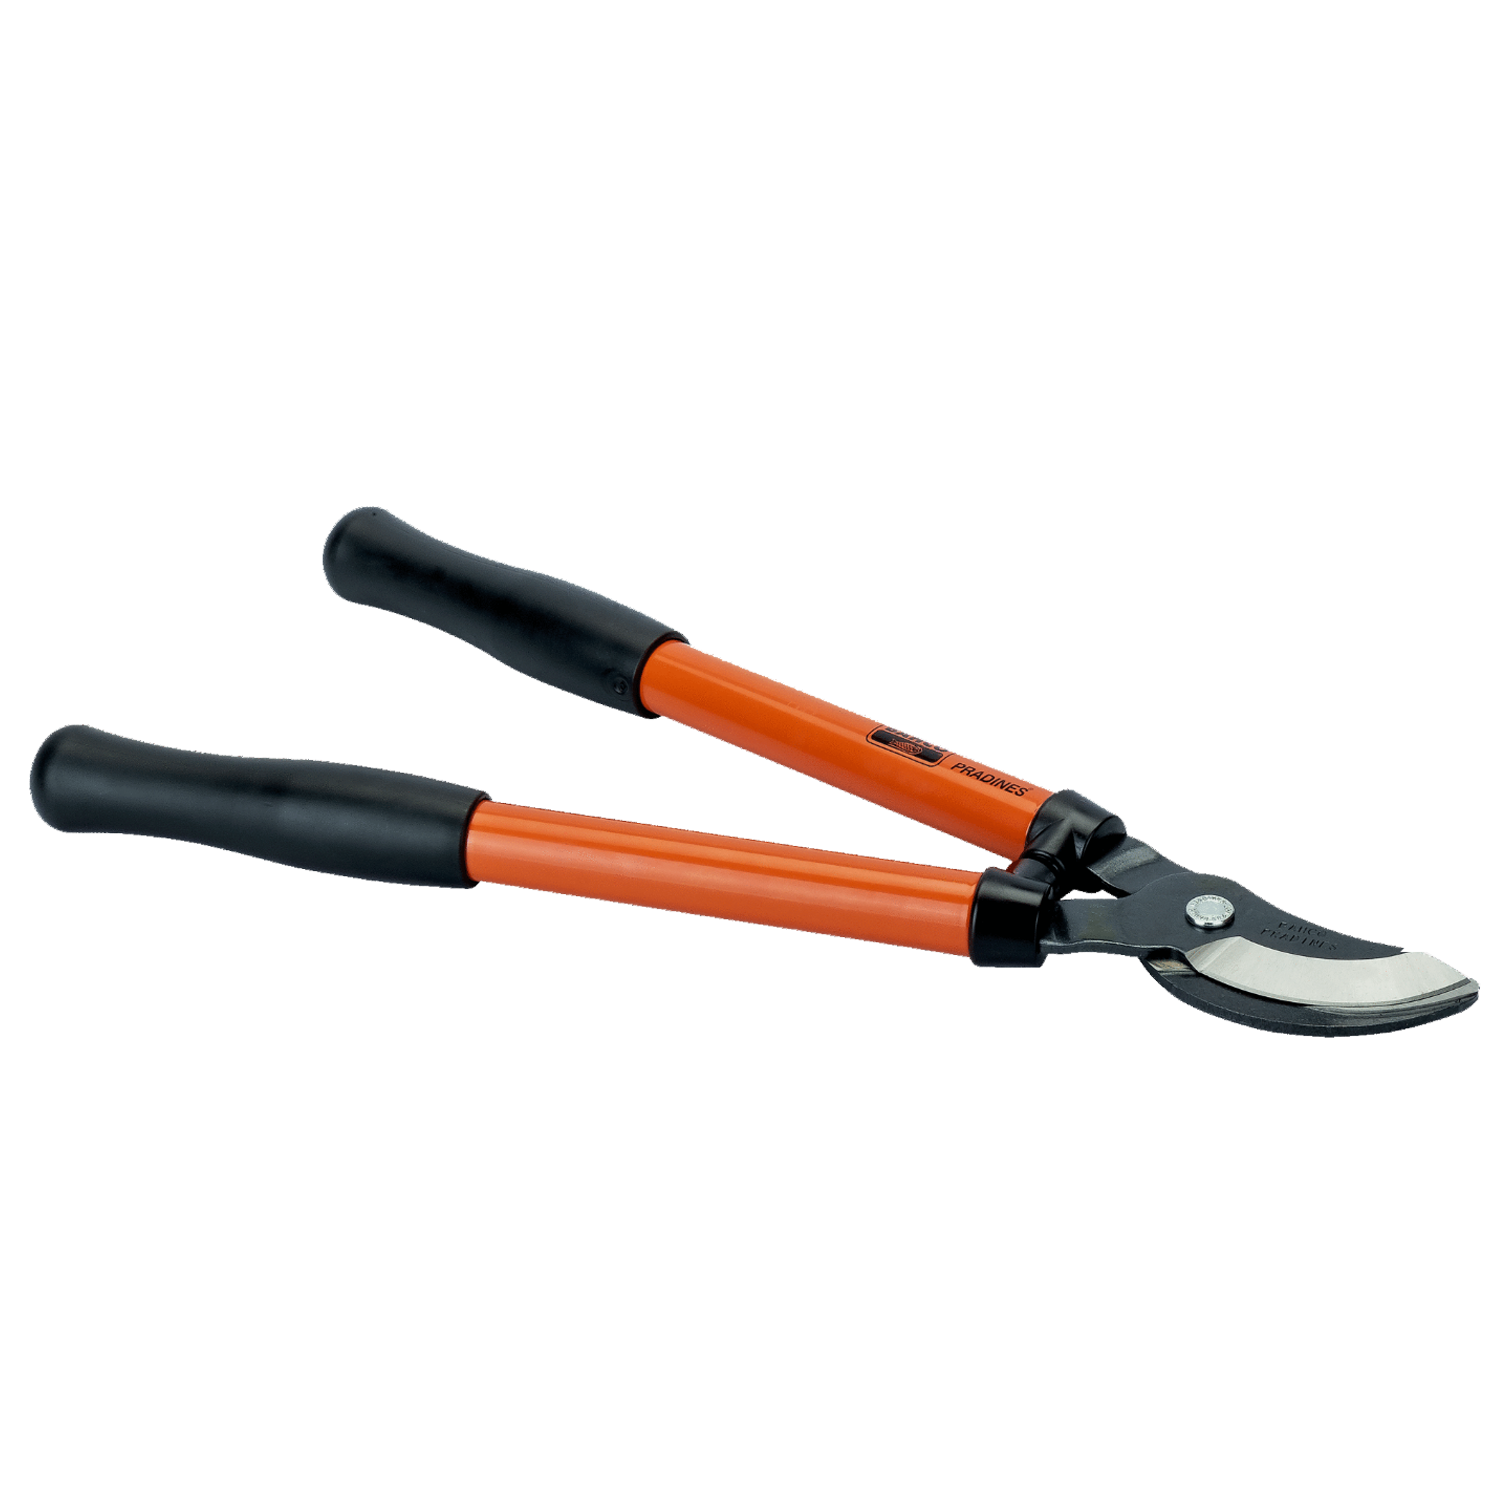 600mm 35mm Bypass Loppers with Steel Handle P140-F by Bahco